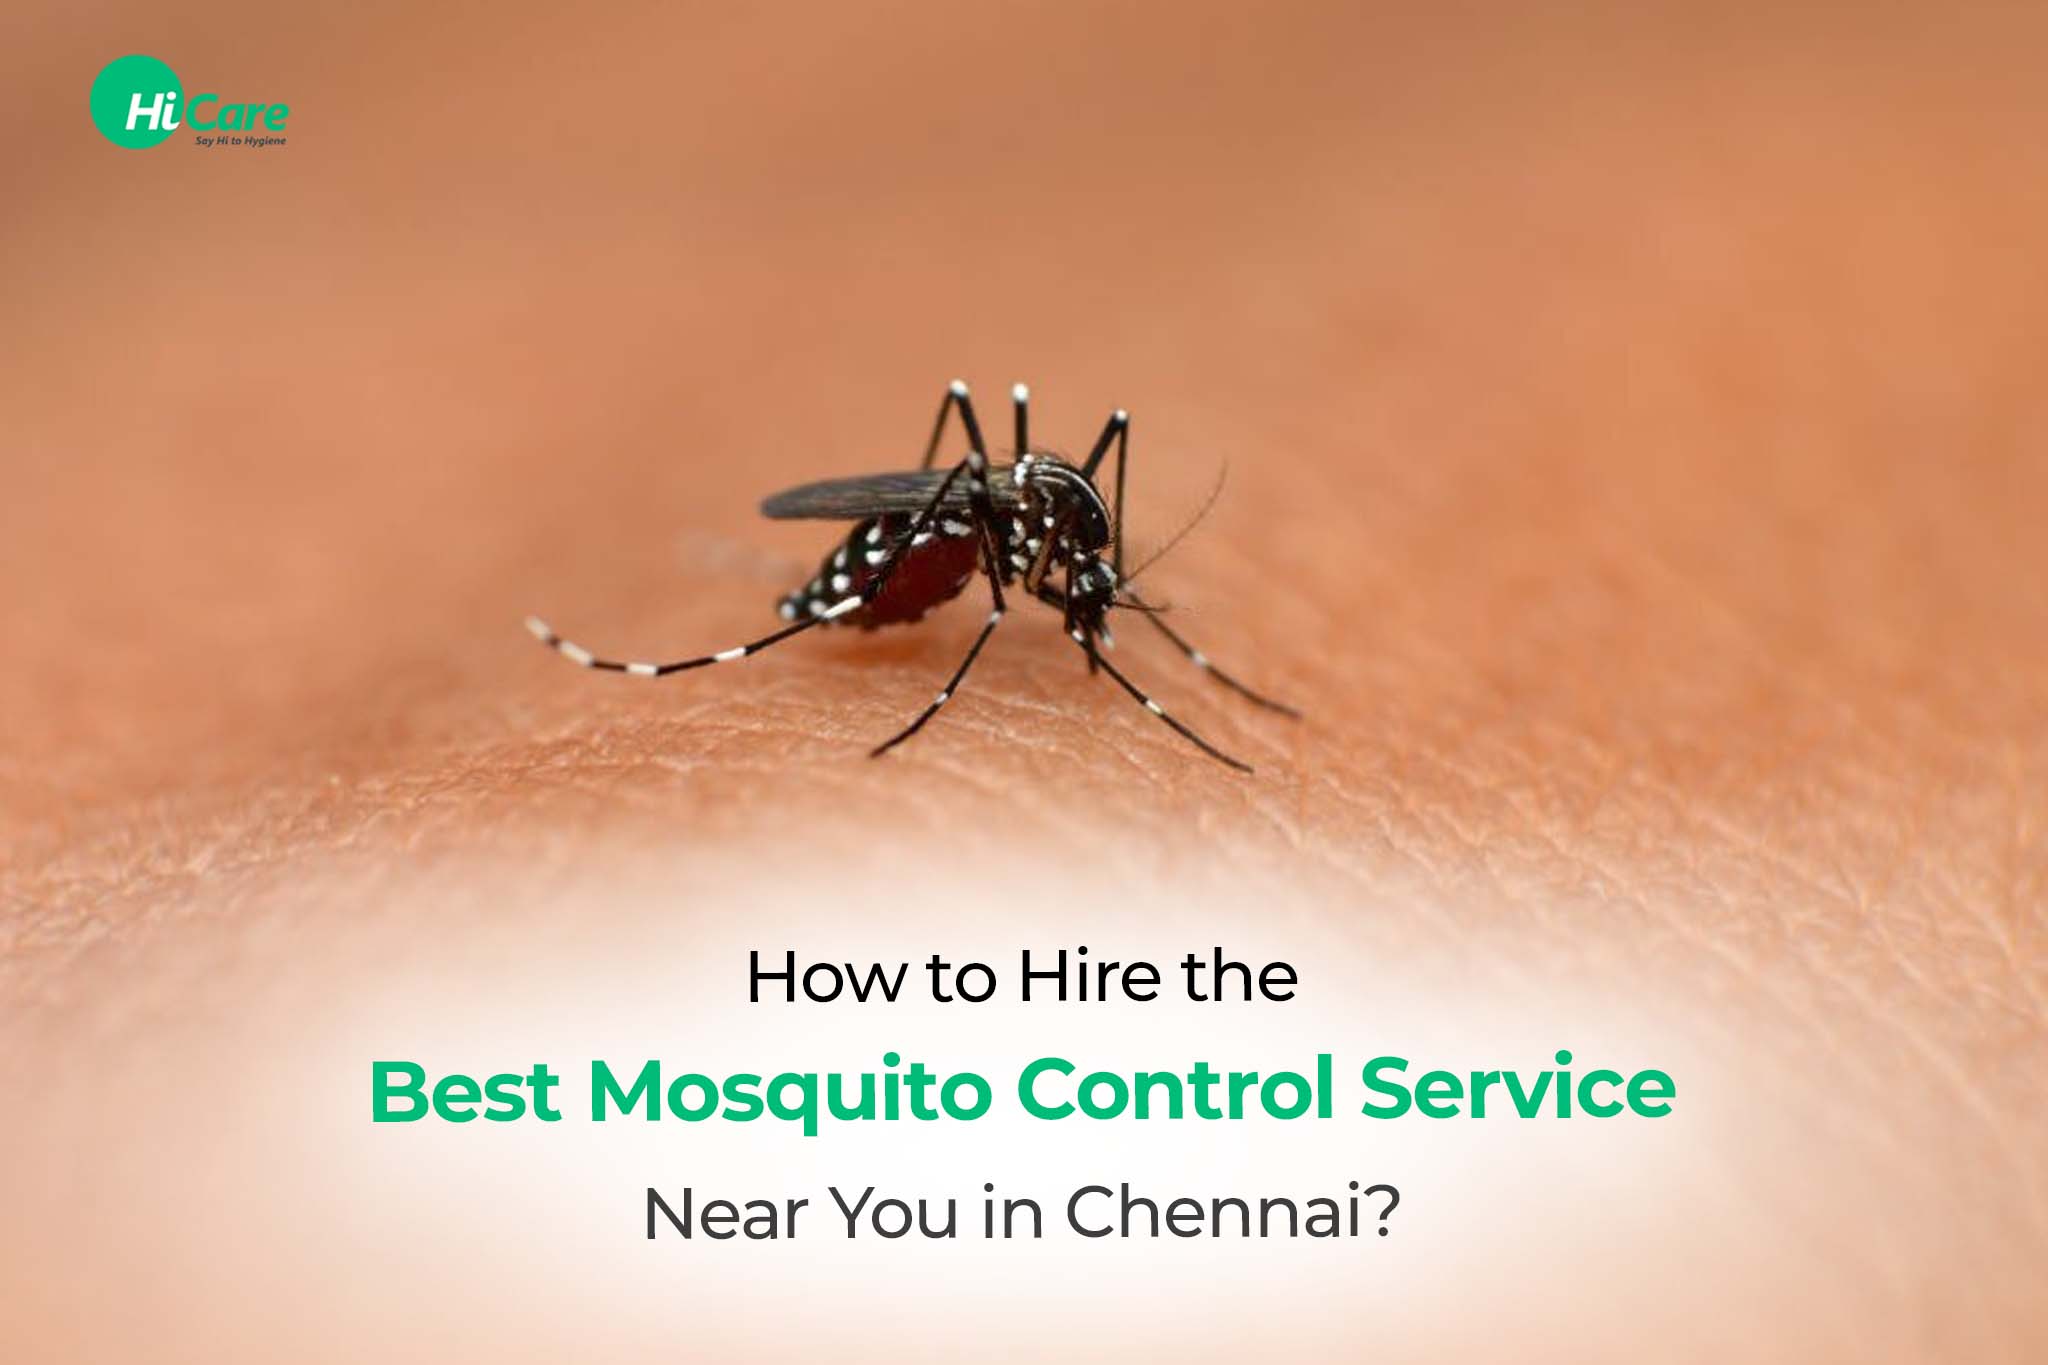 How to Hire the Best Mosquito Control Service Near You in Chennai?